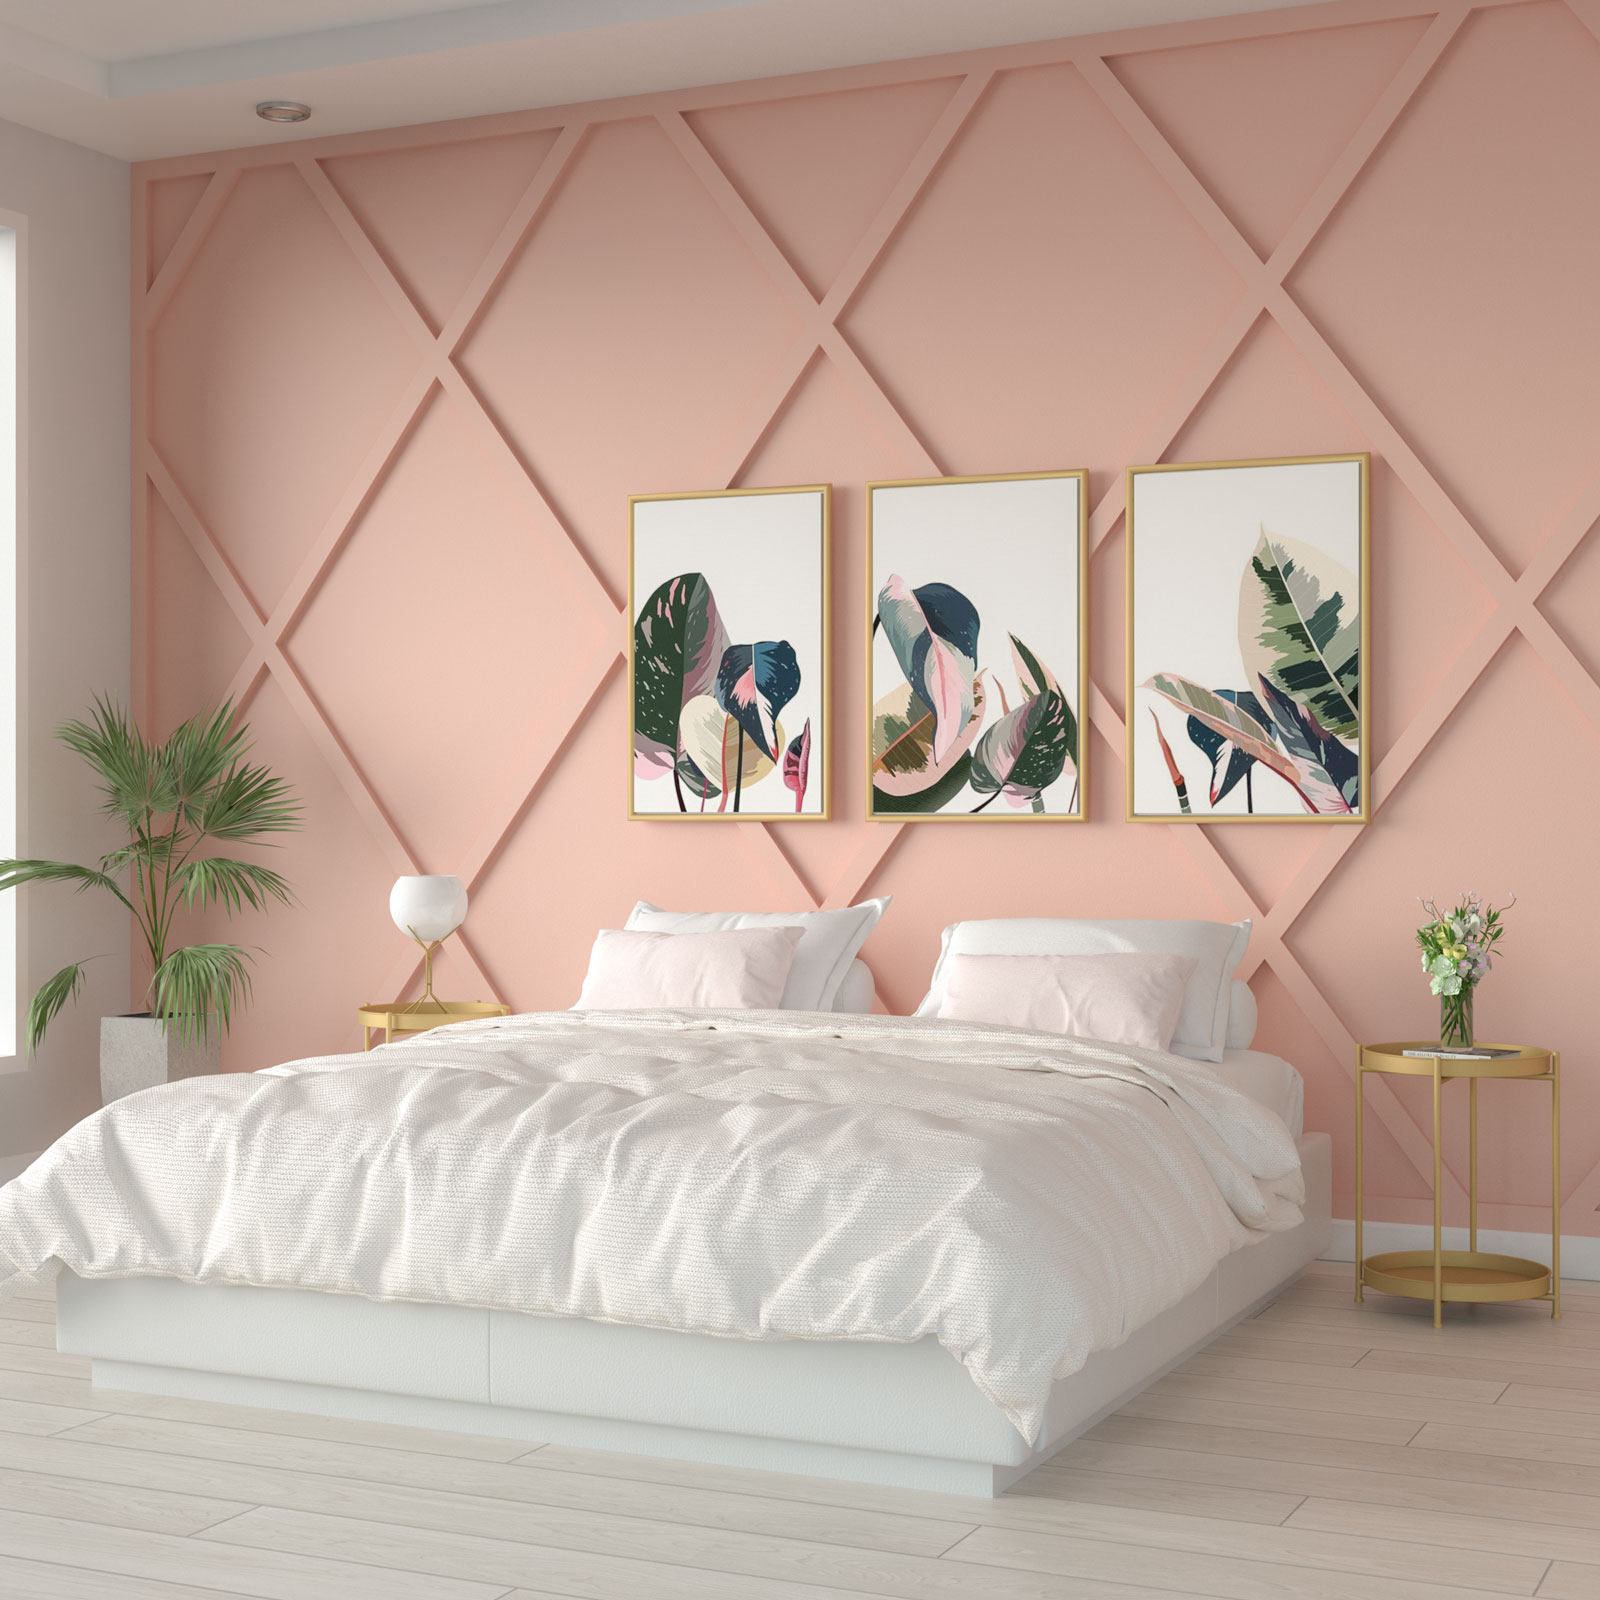 Youthful coral bedroom wall